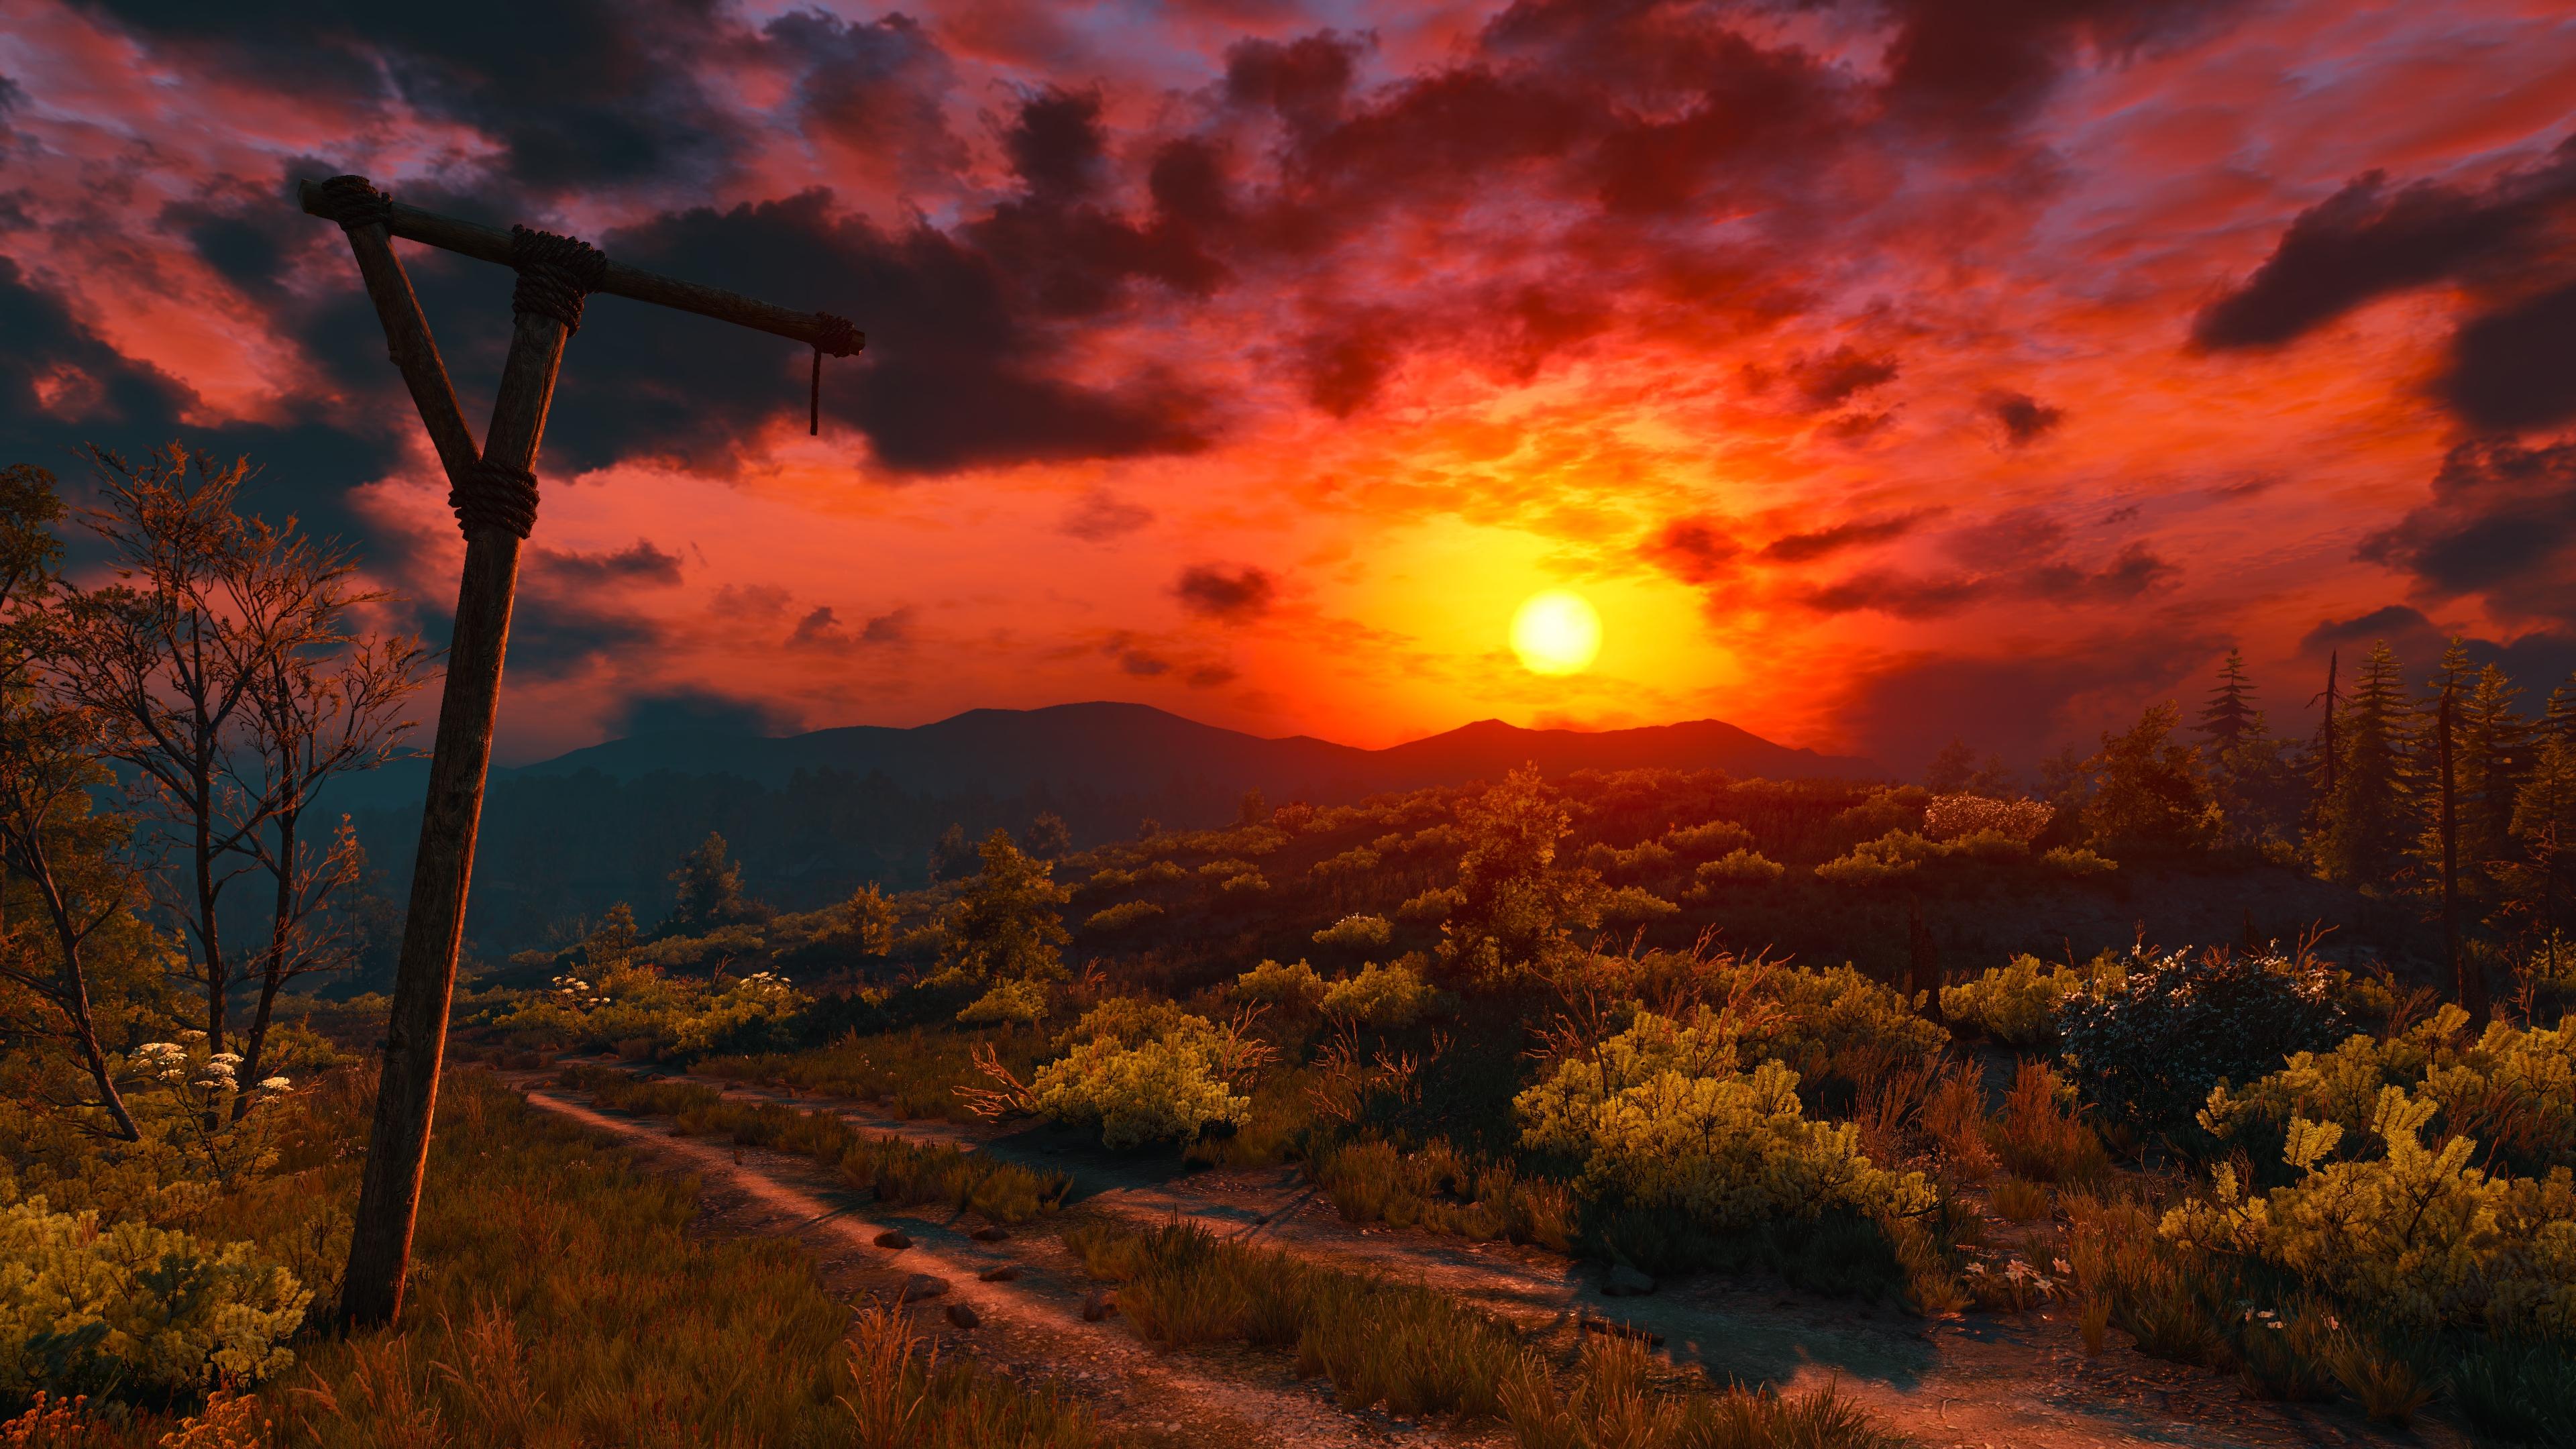 General 3840x2160 The Witcher 3: Wild Hunt video game landscape RPG video games PC gaming screen shot